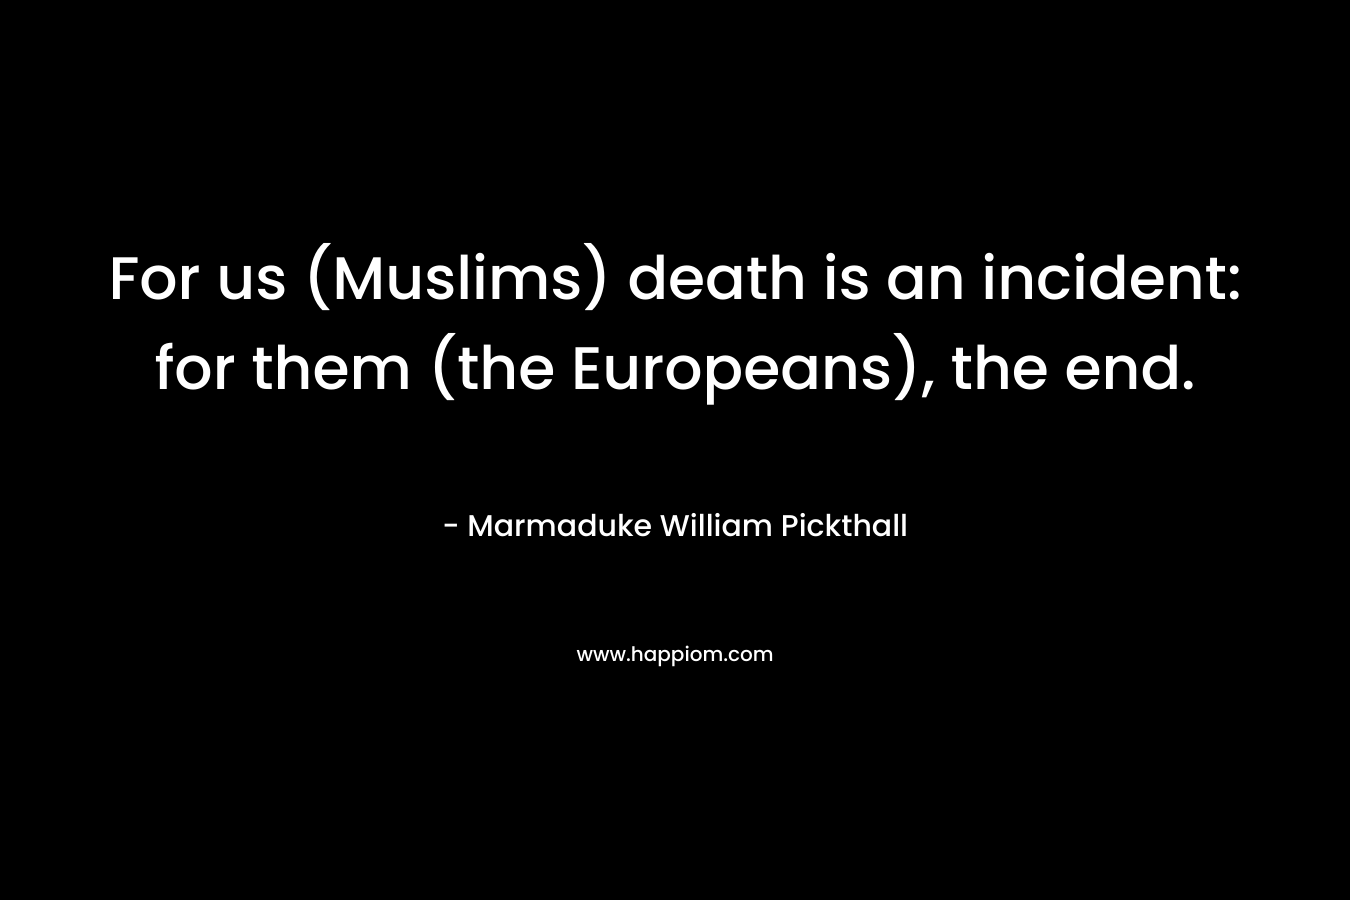 For us (Muslims) death is an incident: for them (the Europeans), the end.